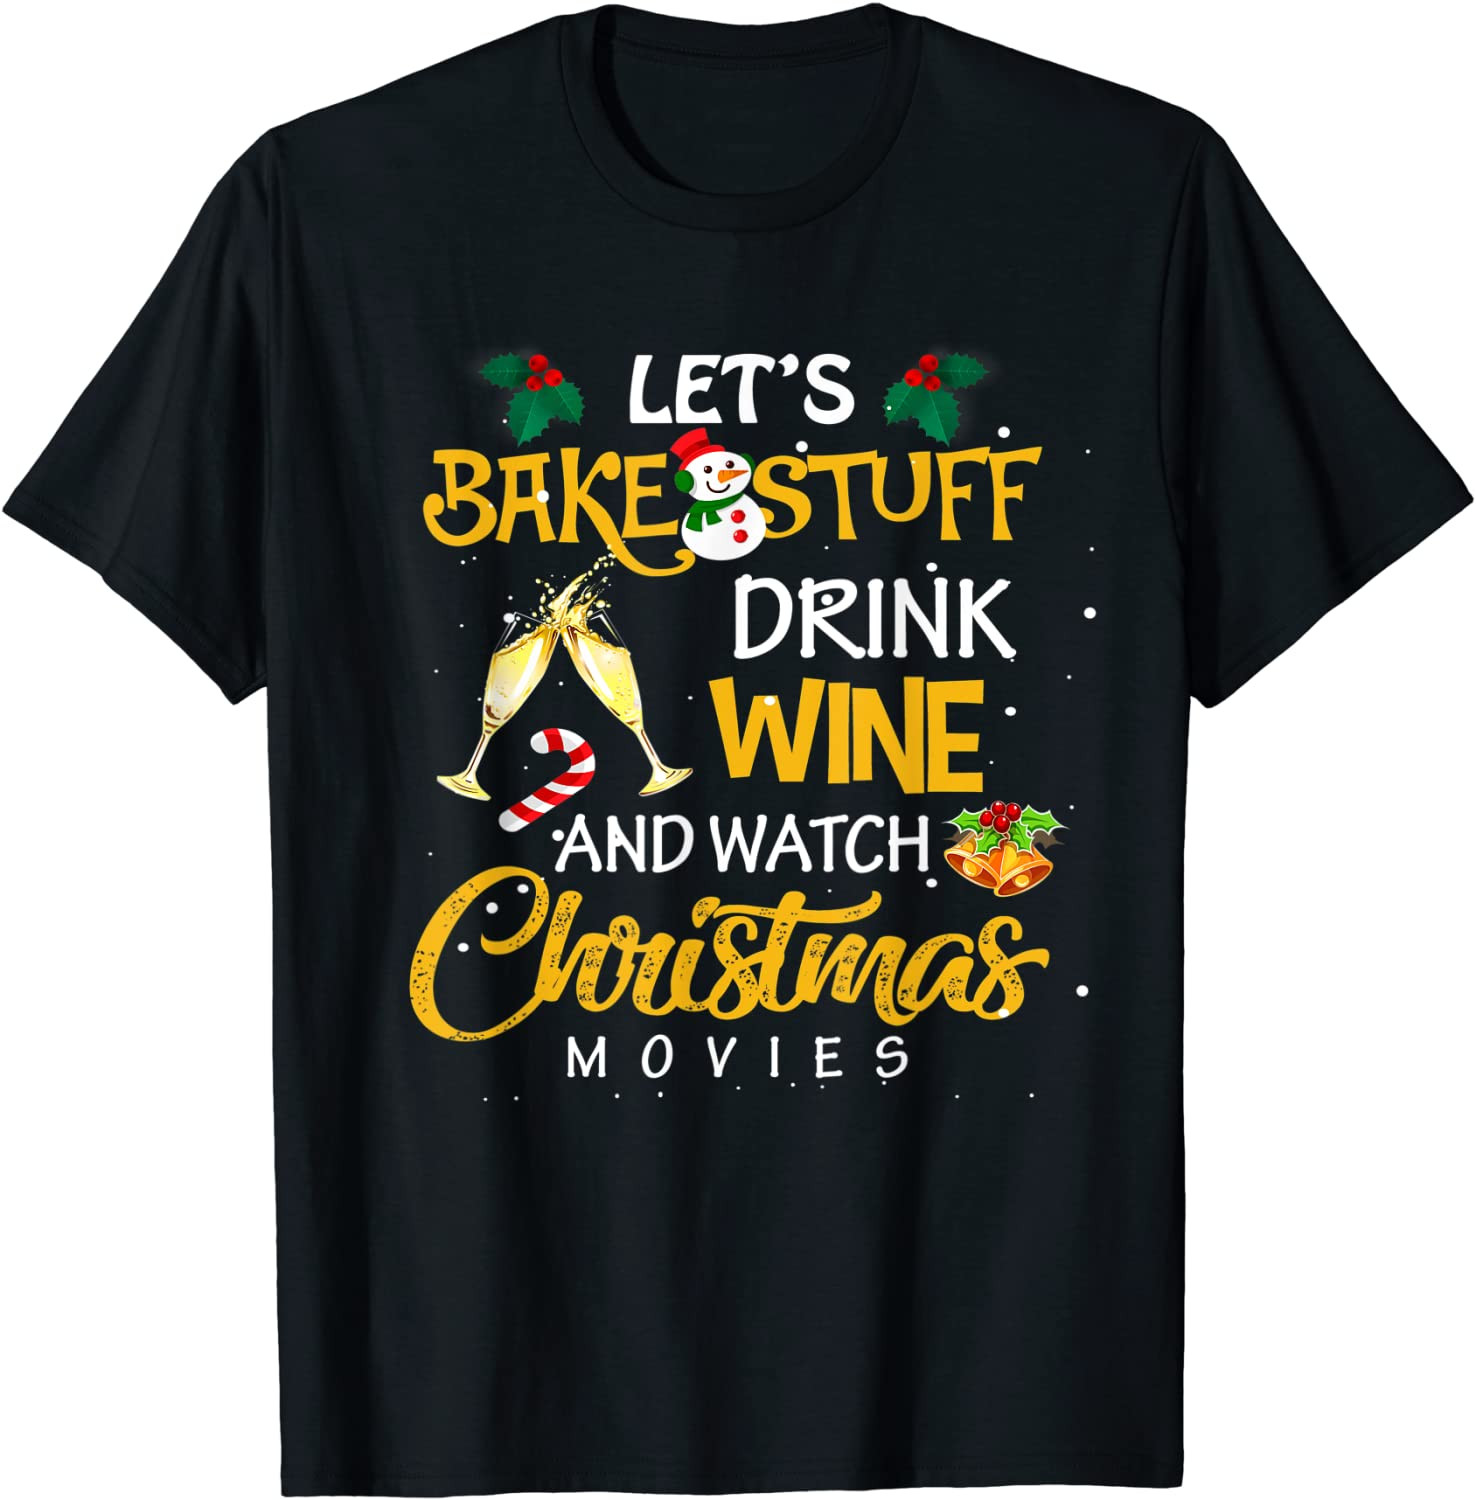 Let's Bake Stuff Drink Wine And Watch Christmas Movies Gifts T-Shirt